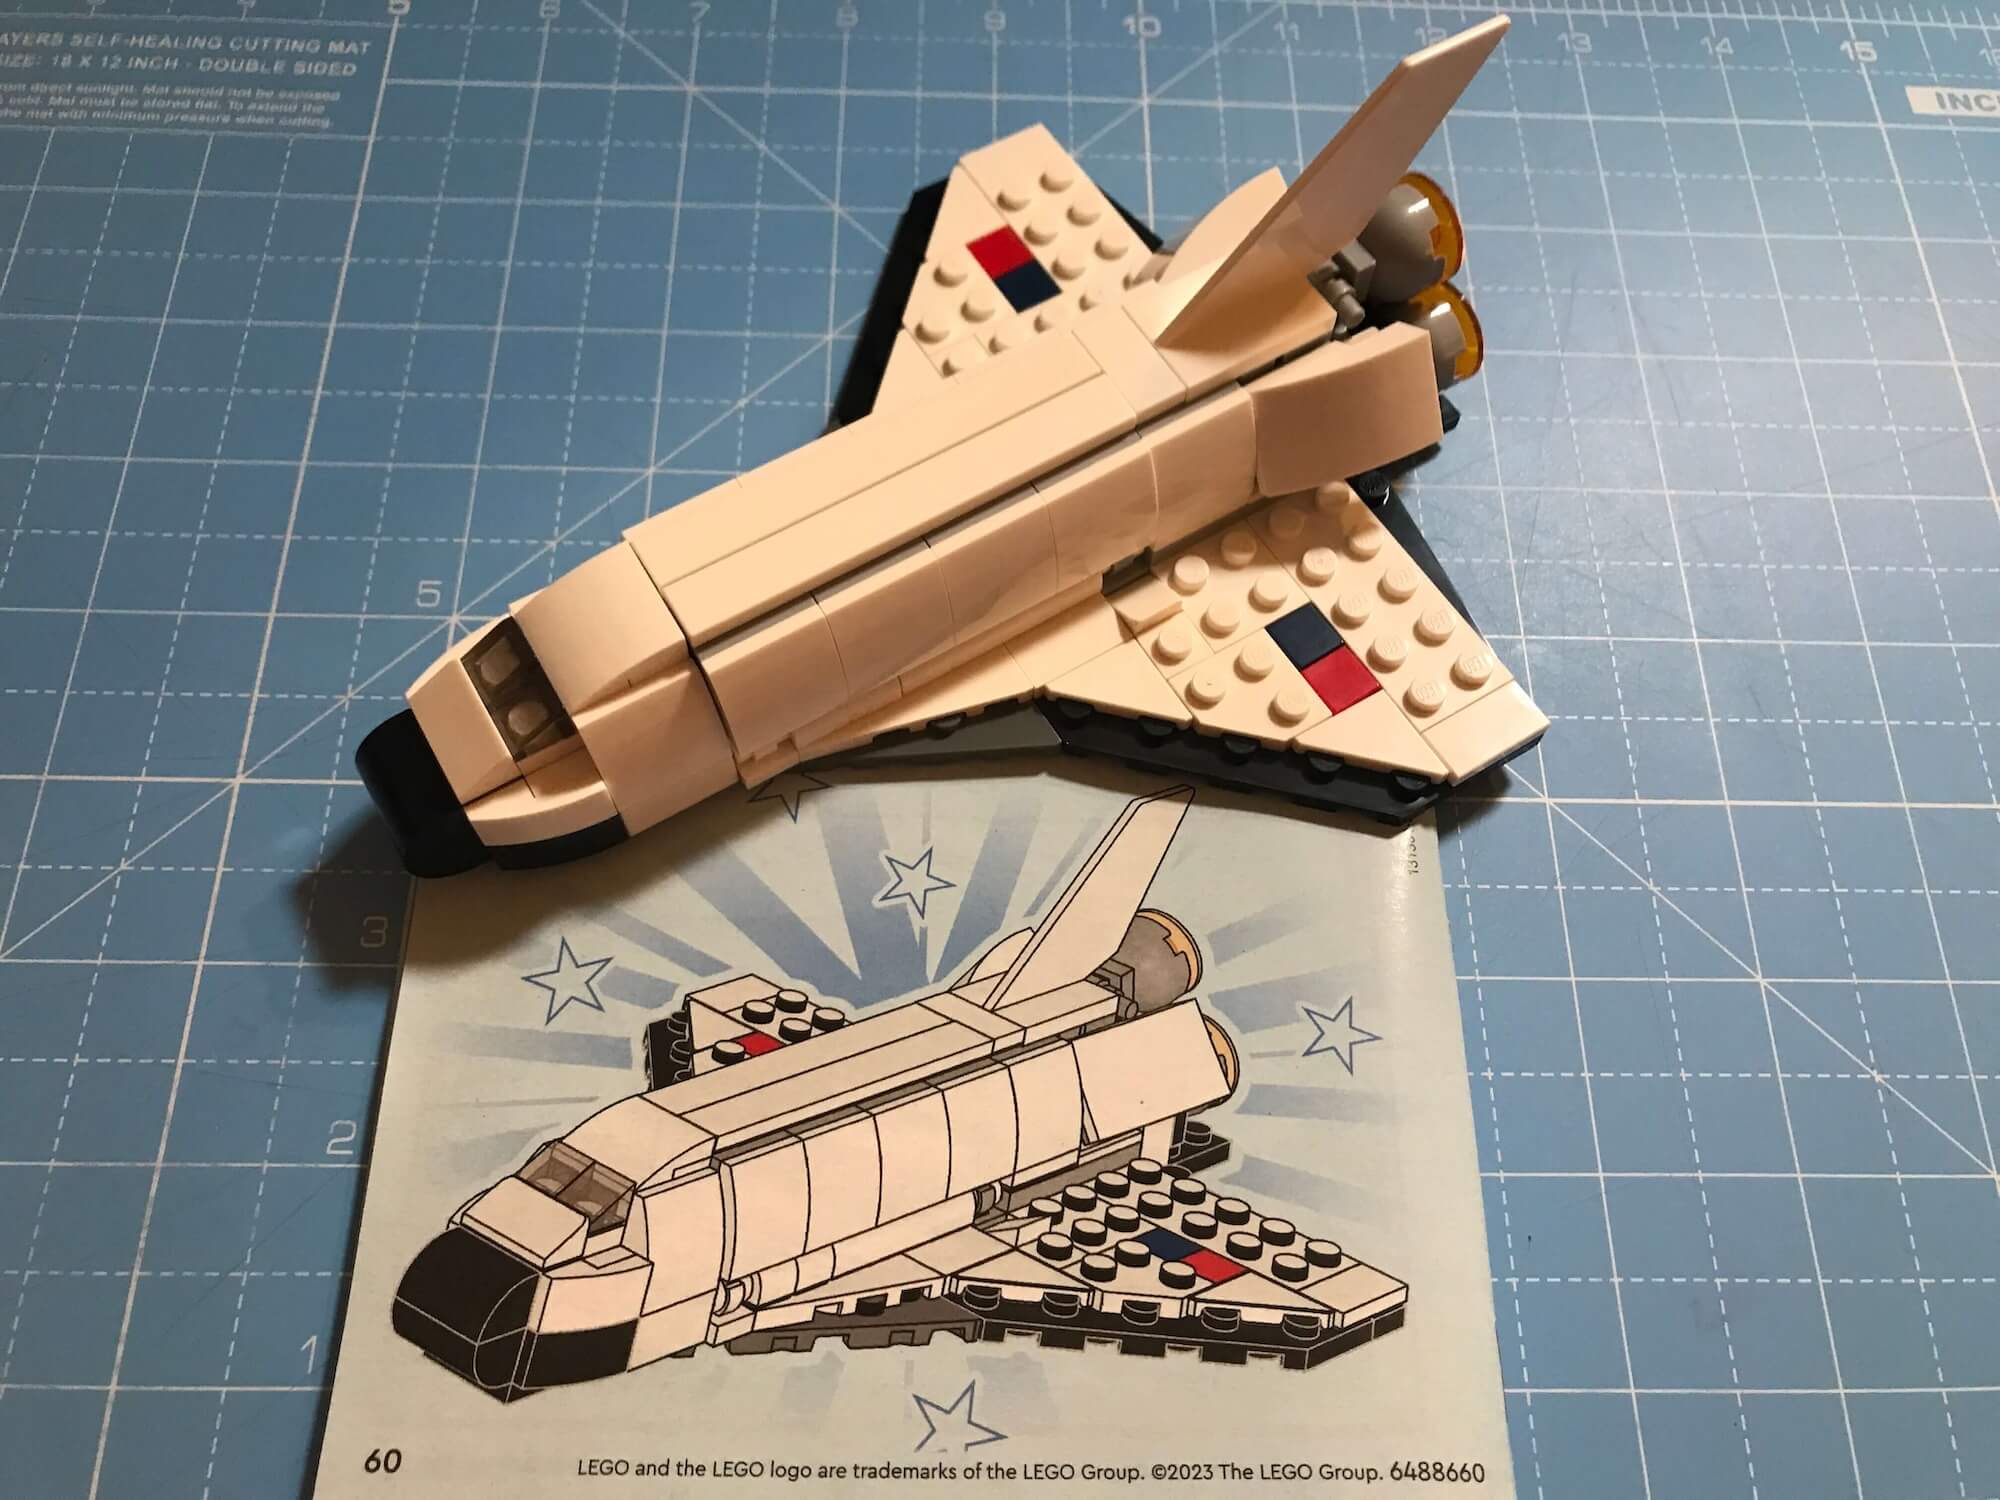 Completed Shuttle on the project mat with the instruction book.